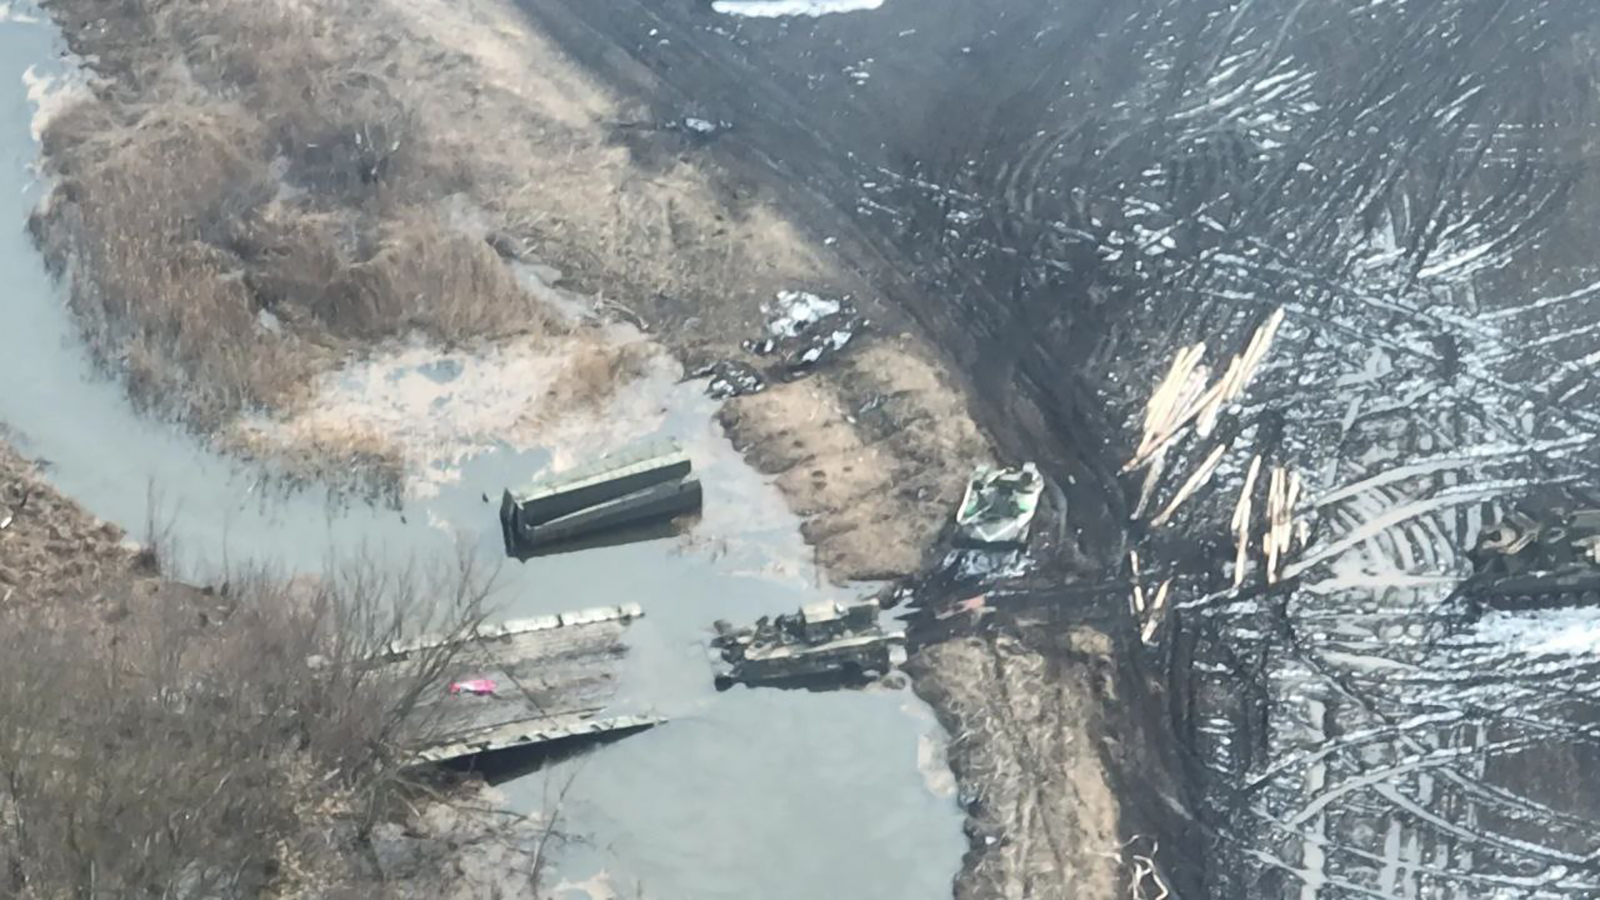 A photo, published on social media on March 13, shows the pontoon bridge destroyed, in addition to nearby Russian military vehicles.